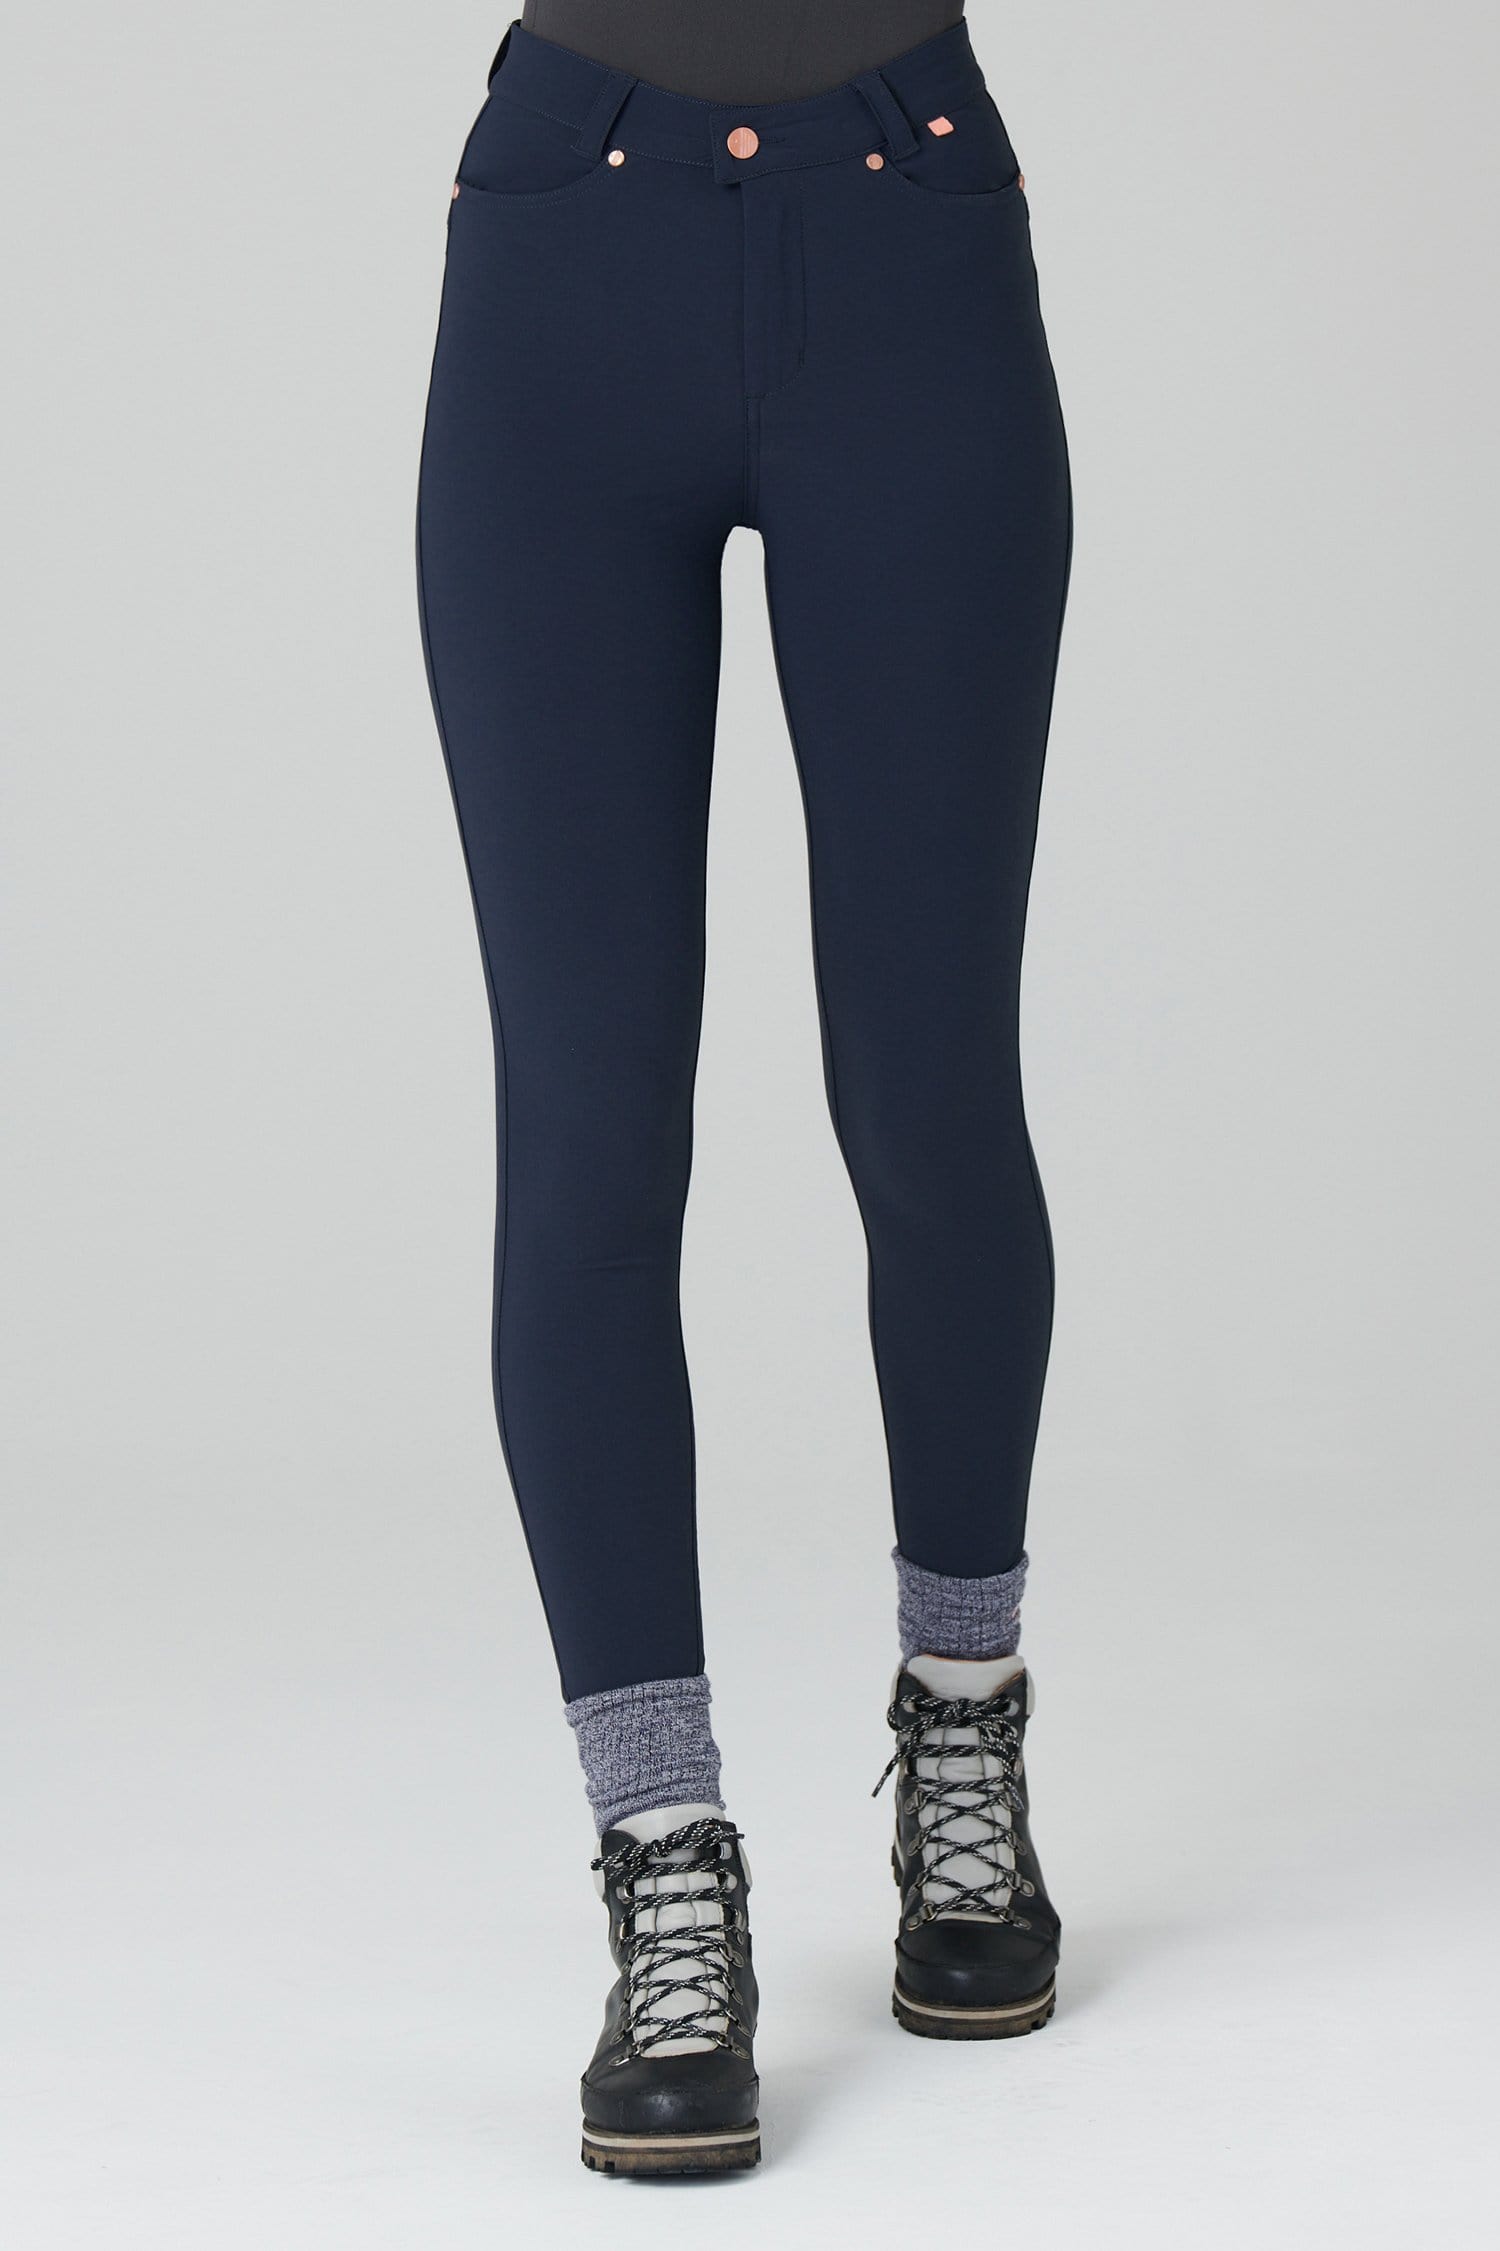 Thermal Skinny Outdoor Trousers - Deep Navy - 38r / Uk20 - Womens - Acai Outdoorwear